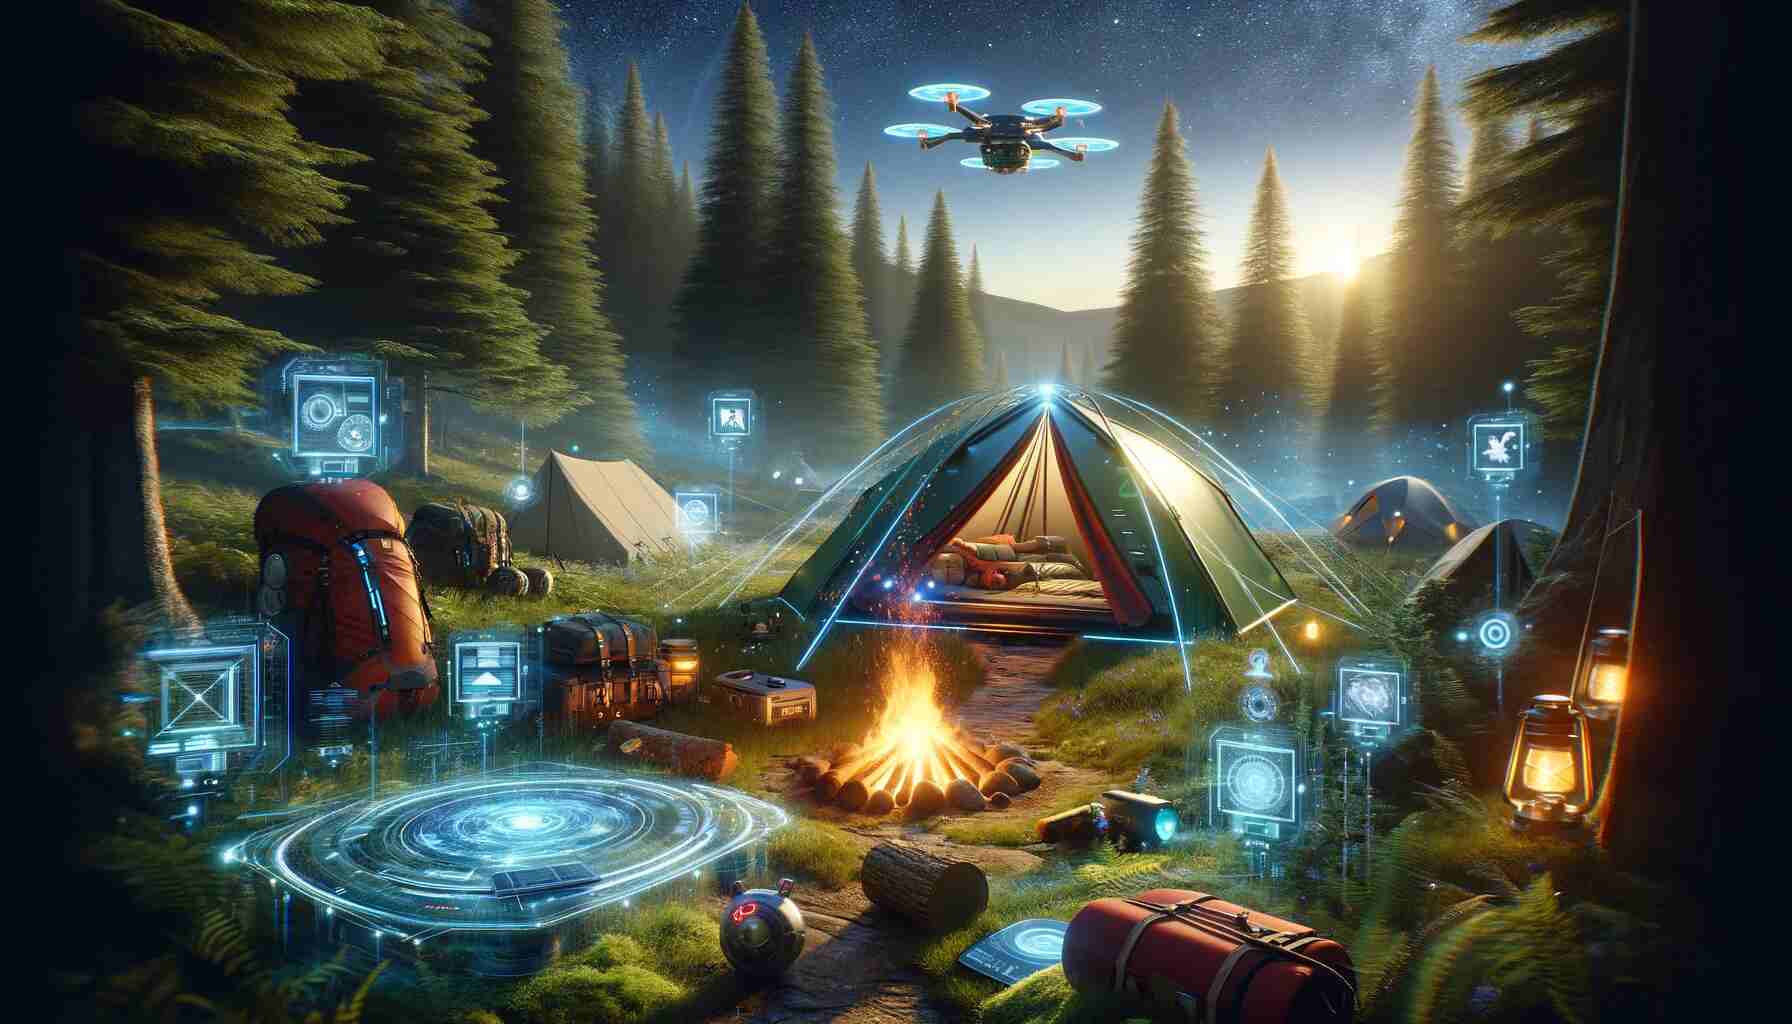 Here is the featured image for The 2024 Outdoor Revolution: Where Nature Meets Tech in Camping, showcasing a futuristic camping scene where natural elements are seamlessly integrated with advanced technology. This visual captures the essence of modern outdoor adventure in 2024.